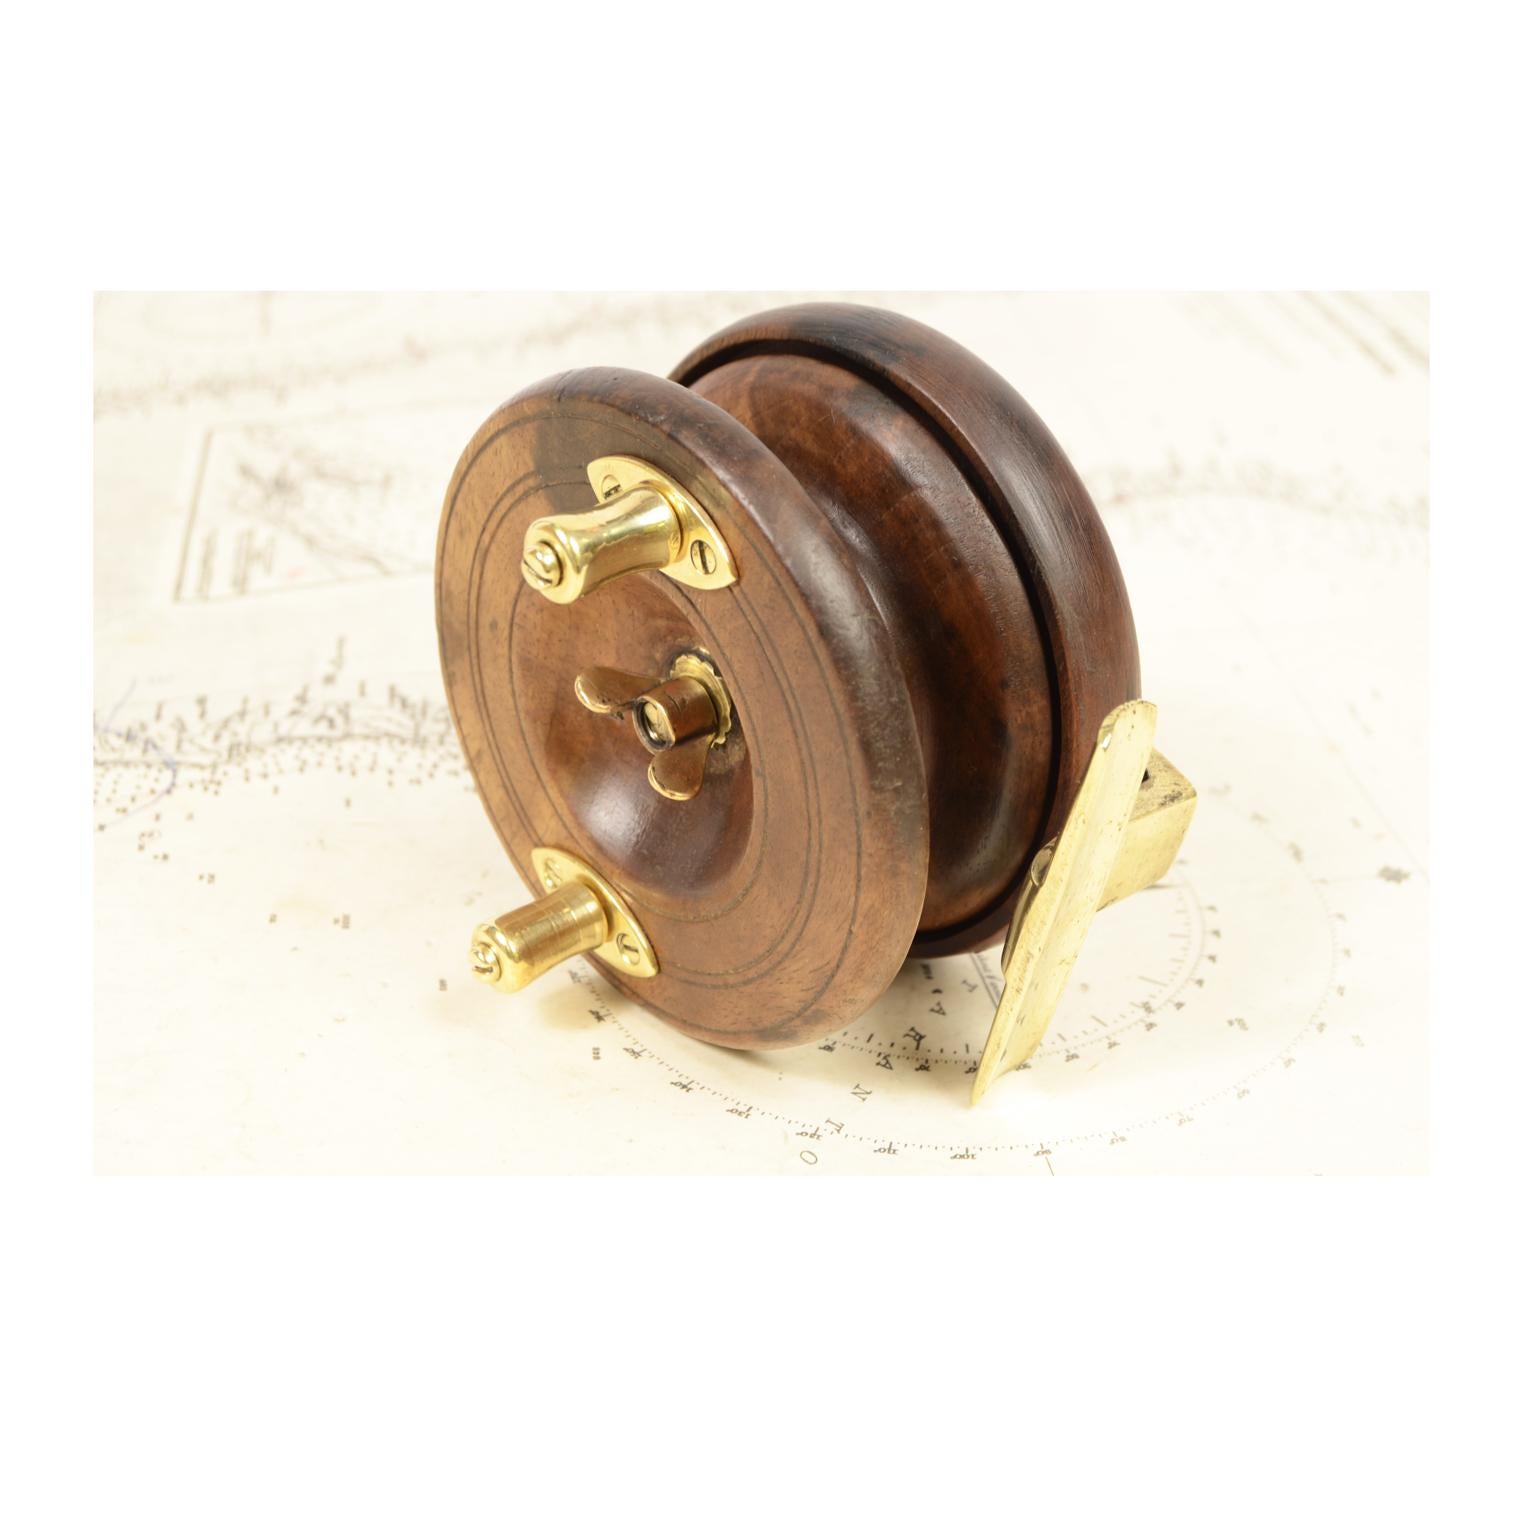 Antique Fishing Reel Made of Turned Oak and Brass, UK, Early 1900s 1